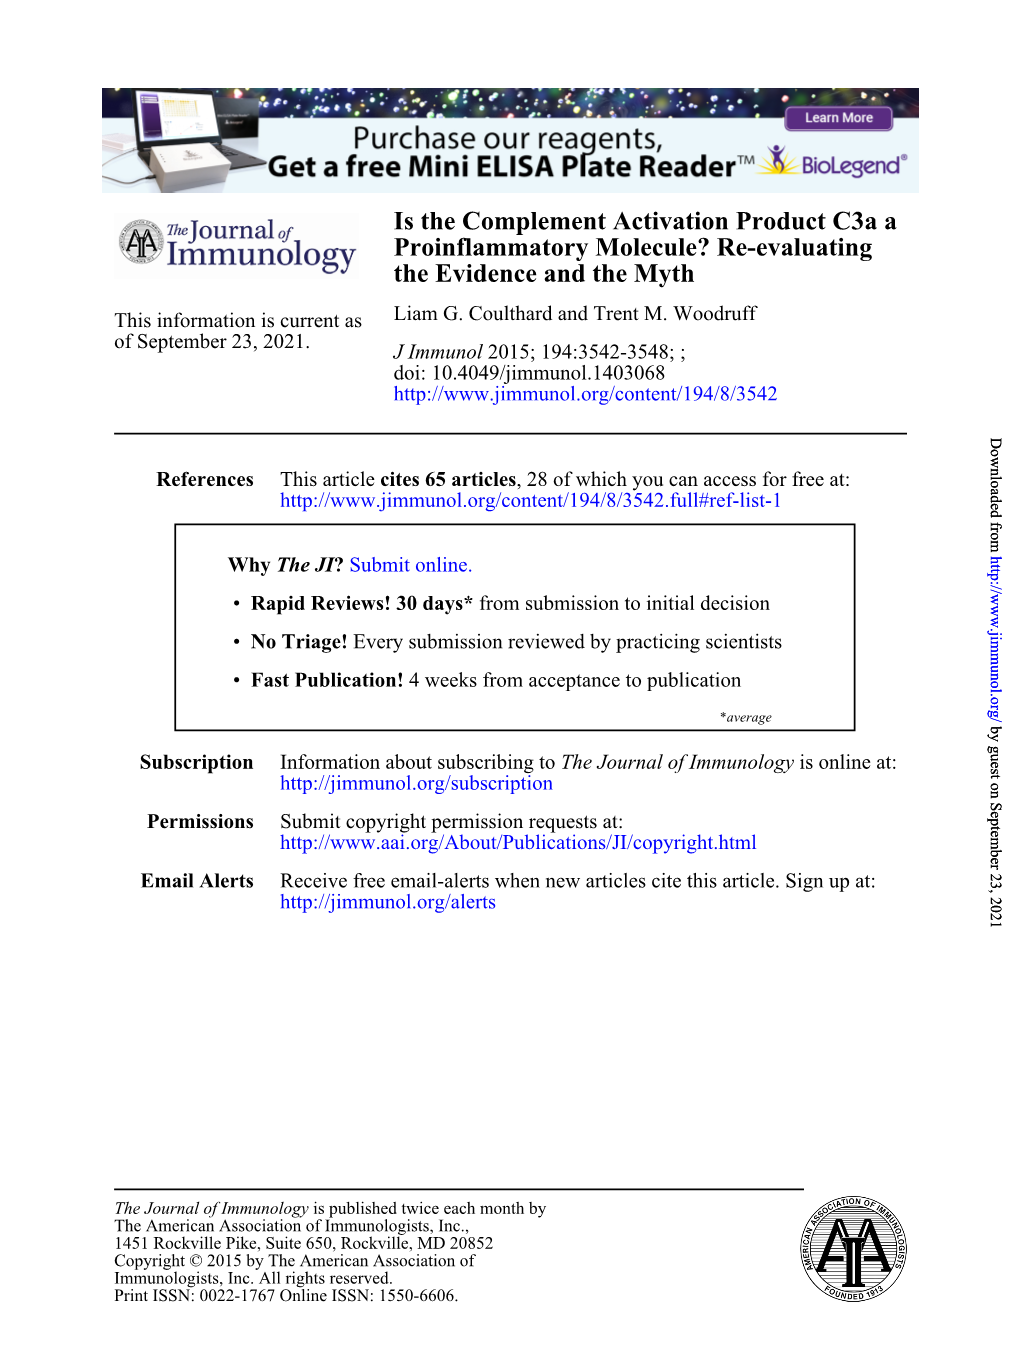 Re-Evaluating Is the Complement Activation Product C3a A